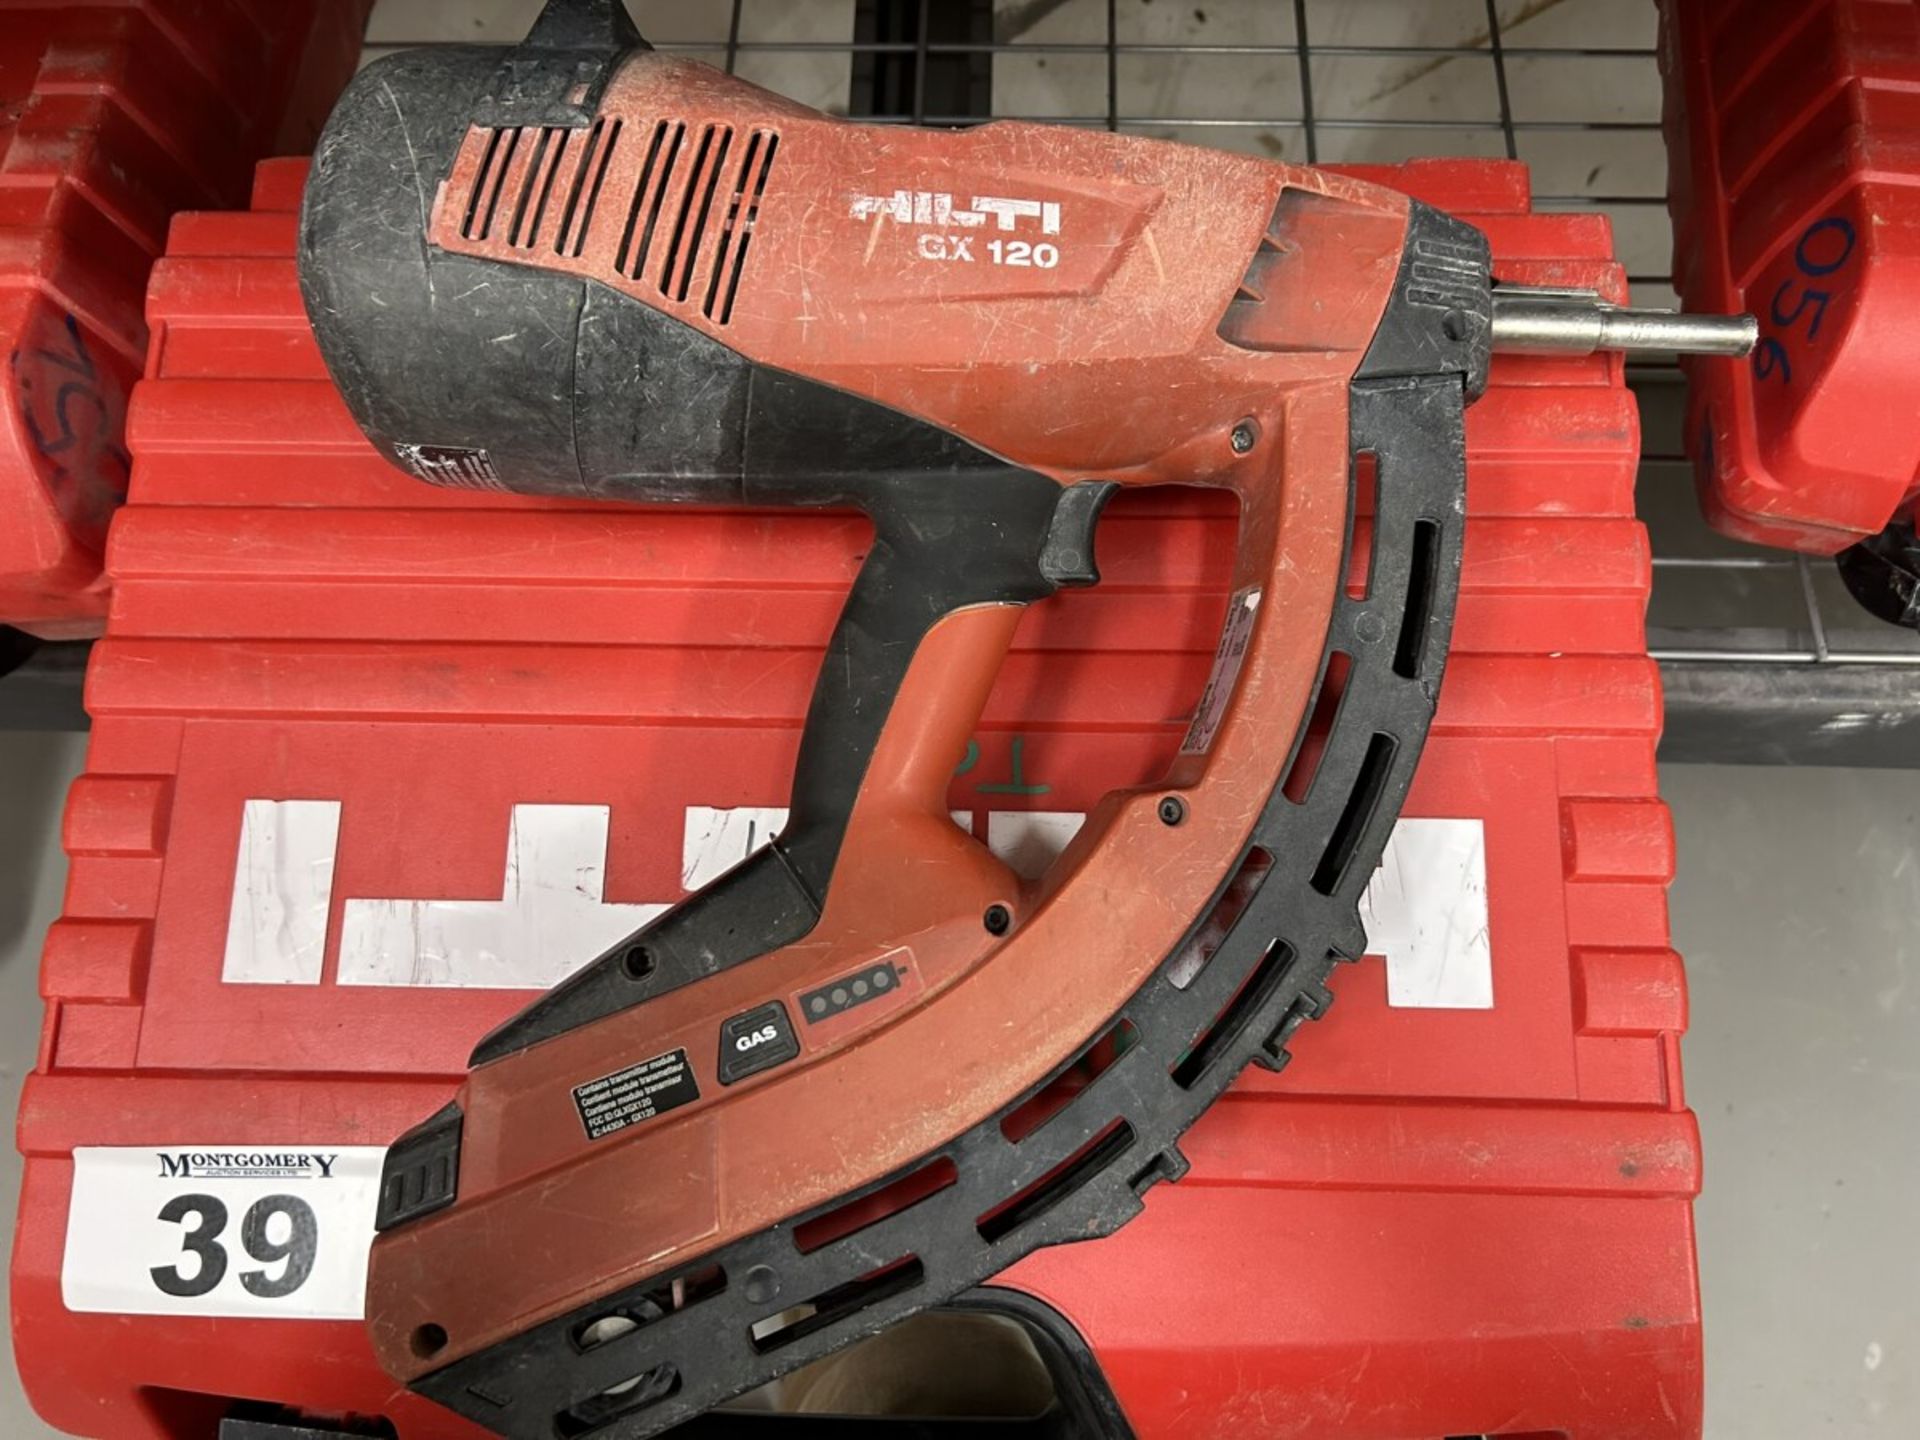 HILTI GX 120 GAS-ACTUATED FASTENING TOOL GAS NAILER WITH SINGLE POWER SOURCE FOR DRYWALL TRACK, - Image 3 of 5